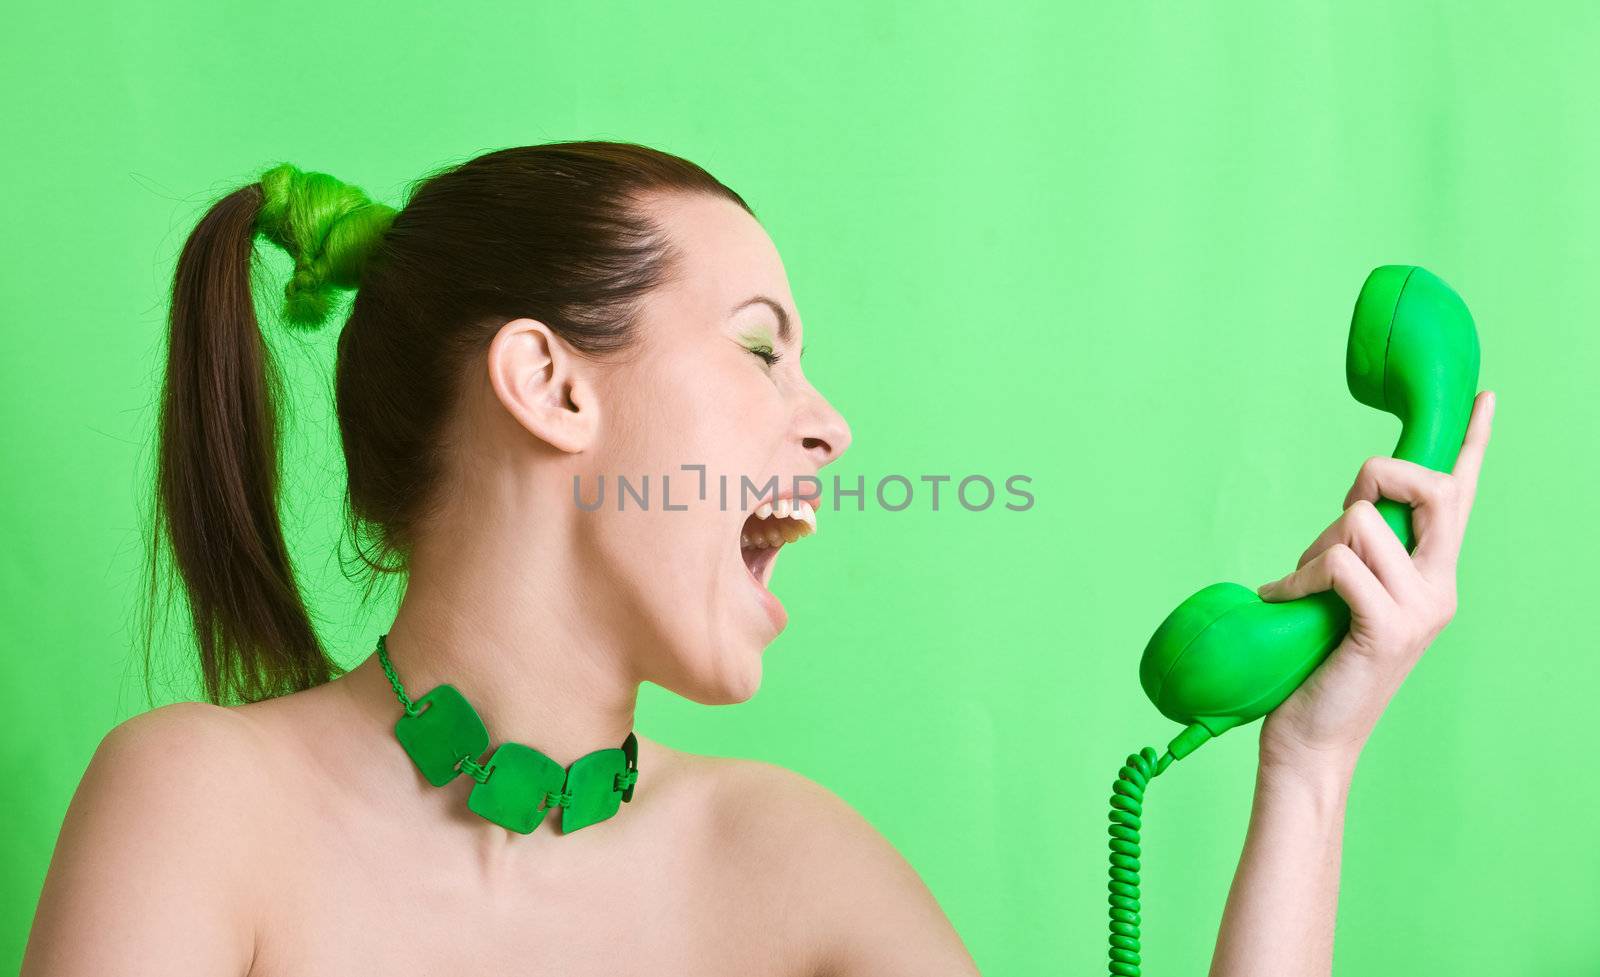 Woman on green background screaming into the green phone